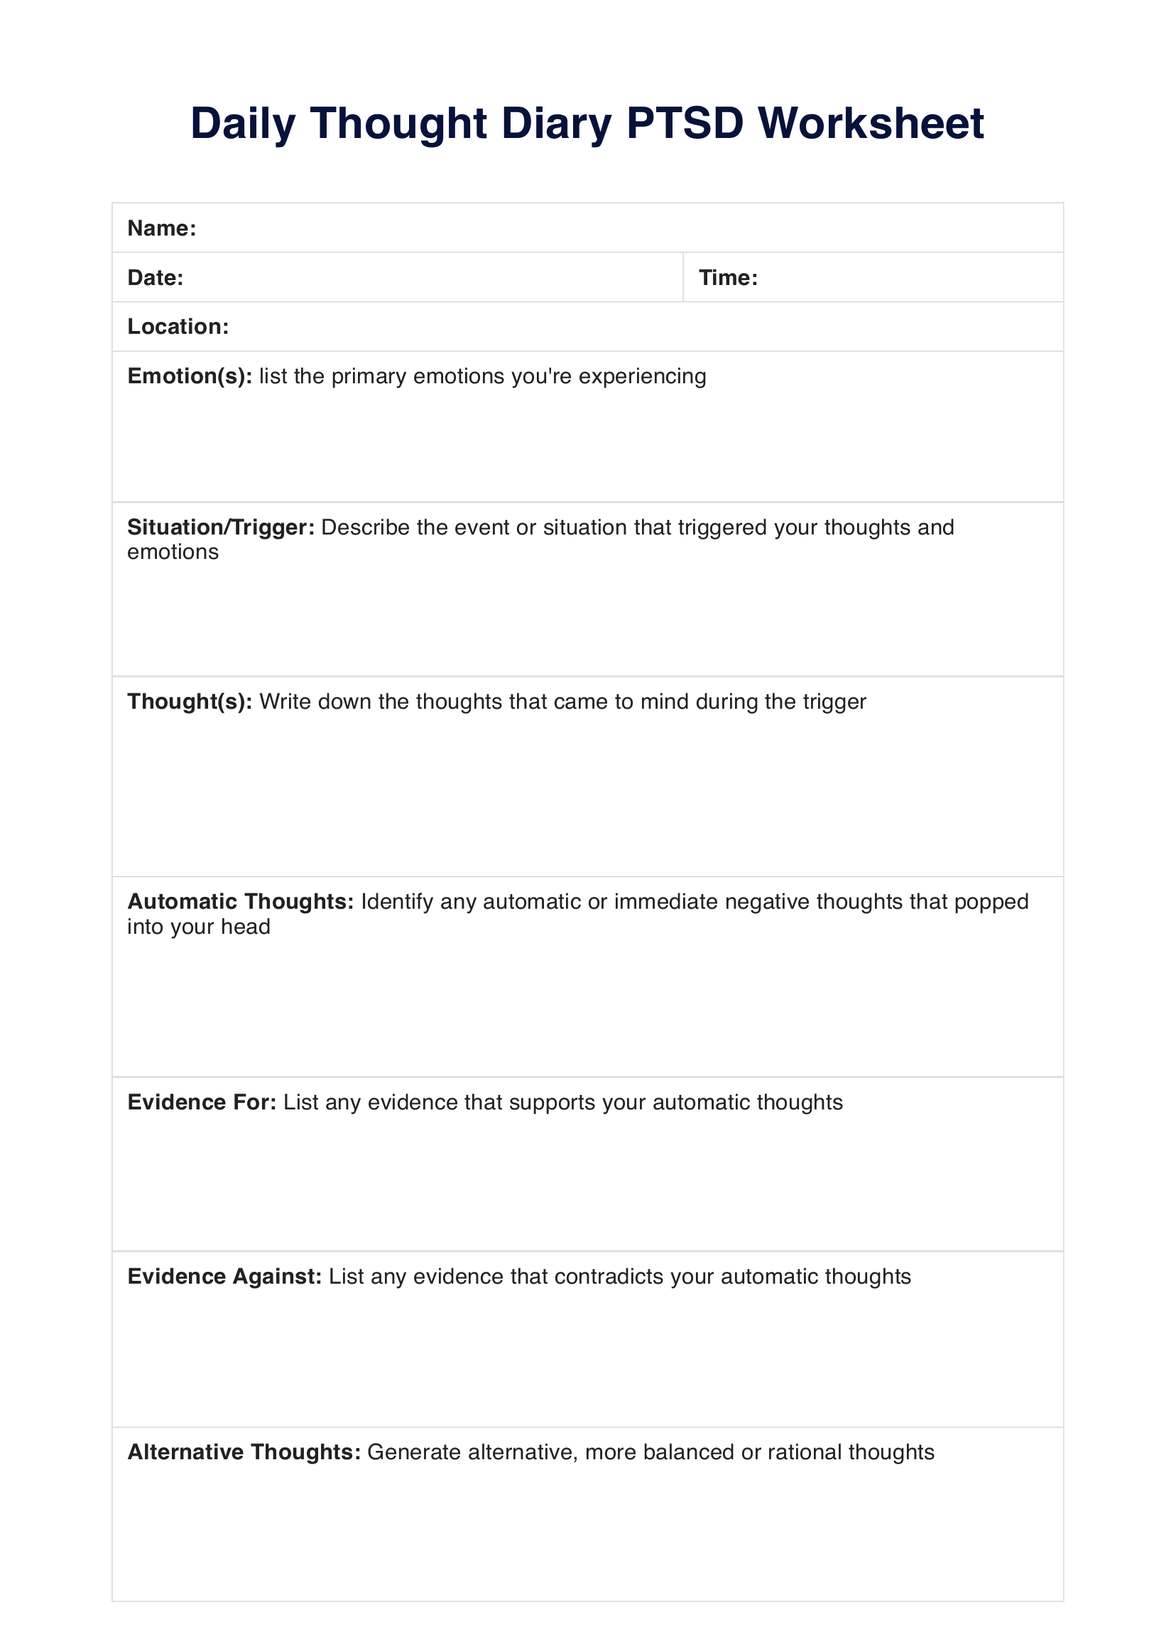 Daily Thought Diary PTSD Worksheets PDF Example